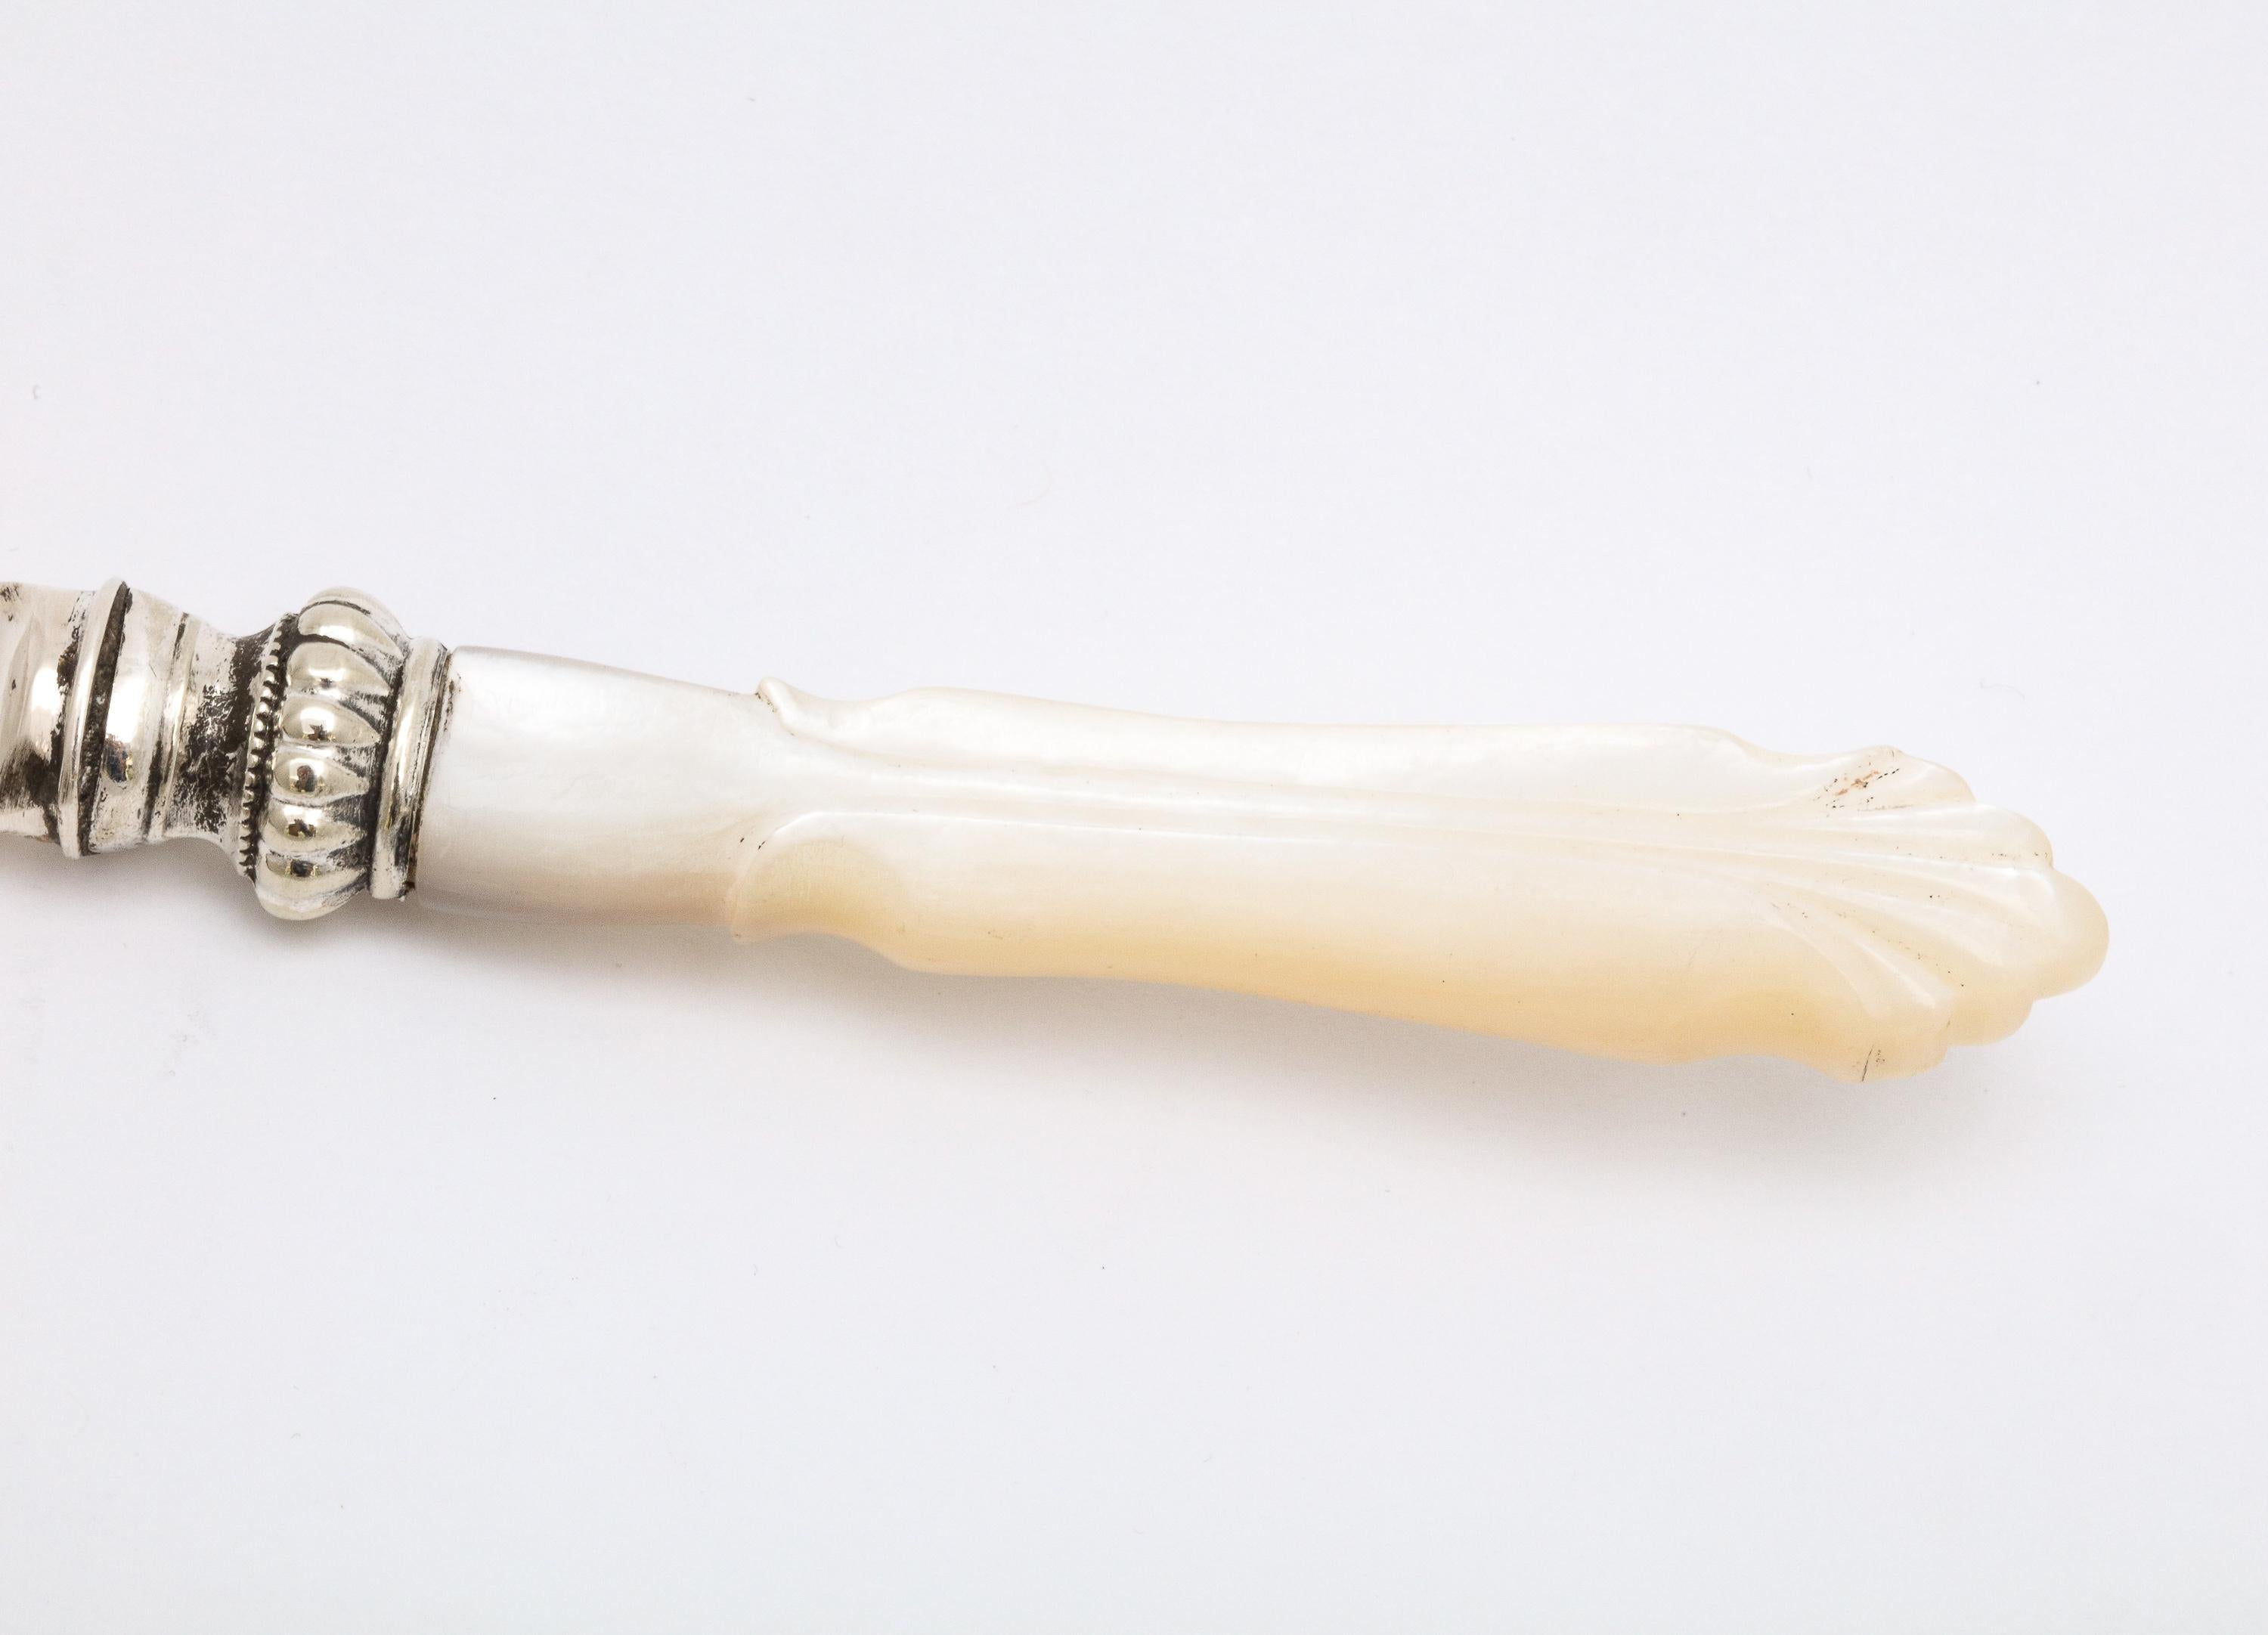 Early 20th Century Art Nouveau Period Sterling Silver and Mother-of-Pearl Letter Opener/Paper Knife